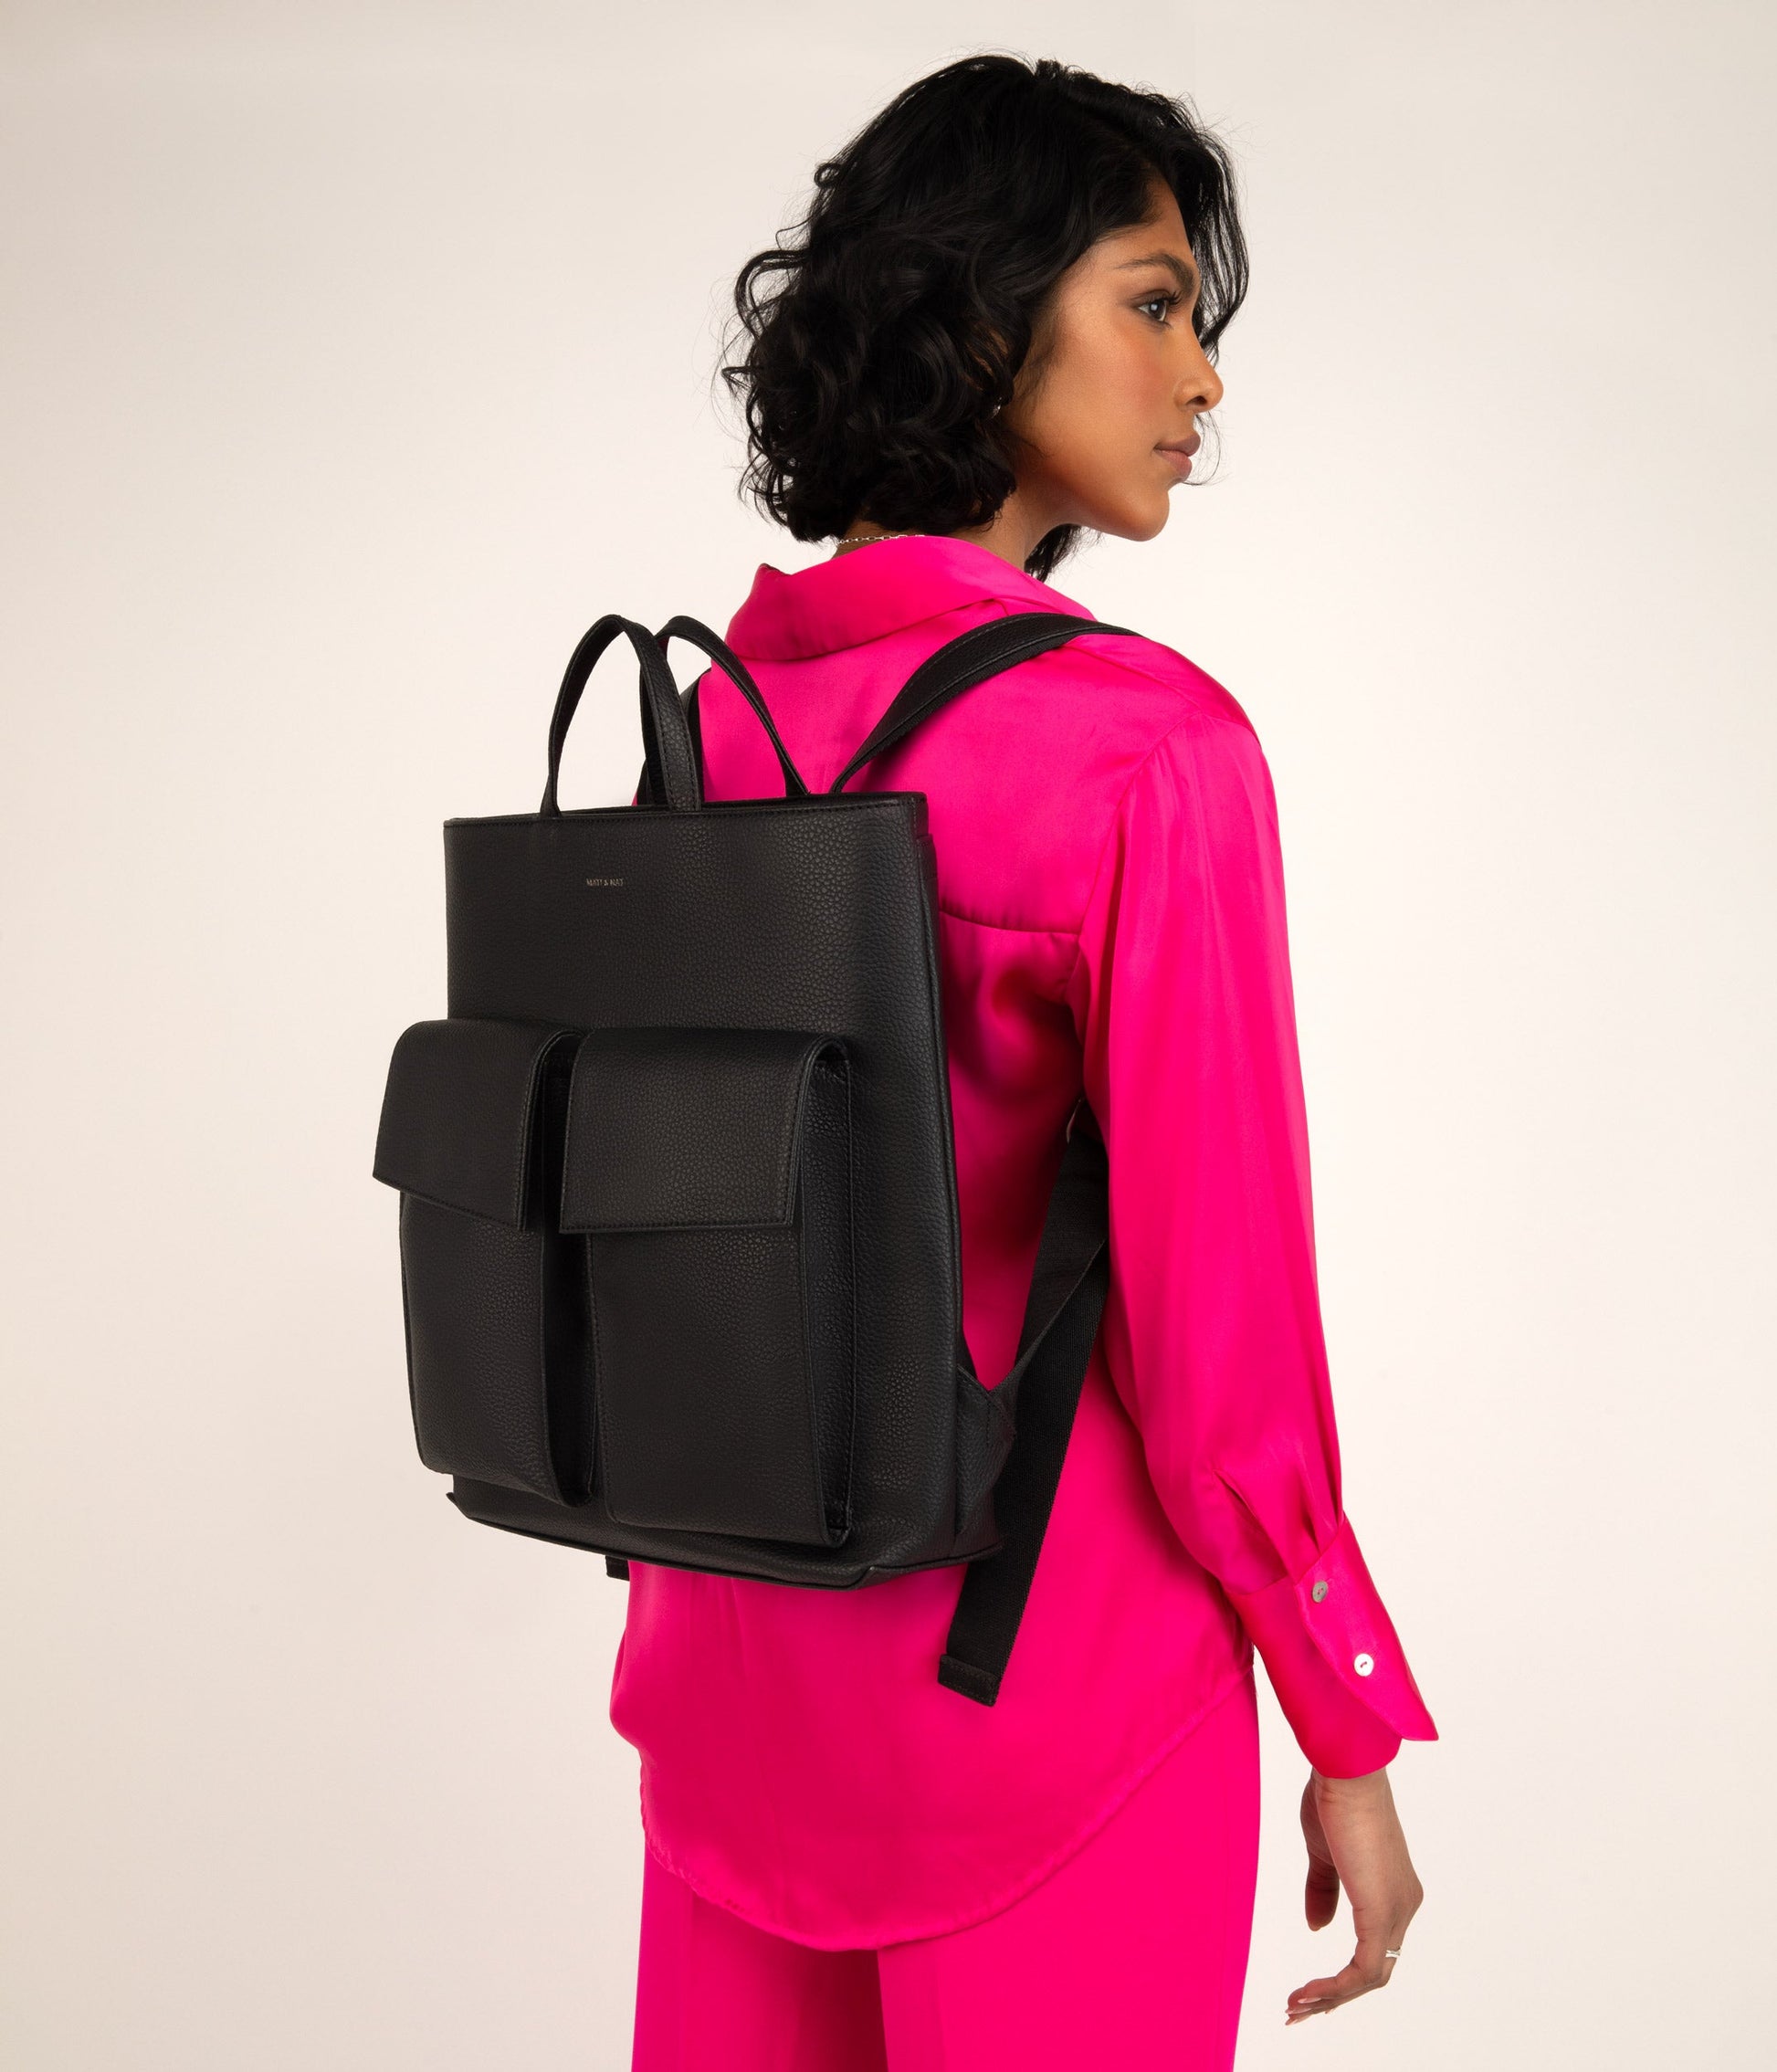 MYRON Vegan Backpack - Purity | Color: Red - variant::lychee